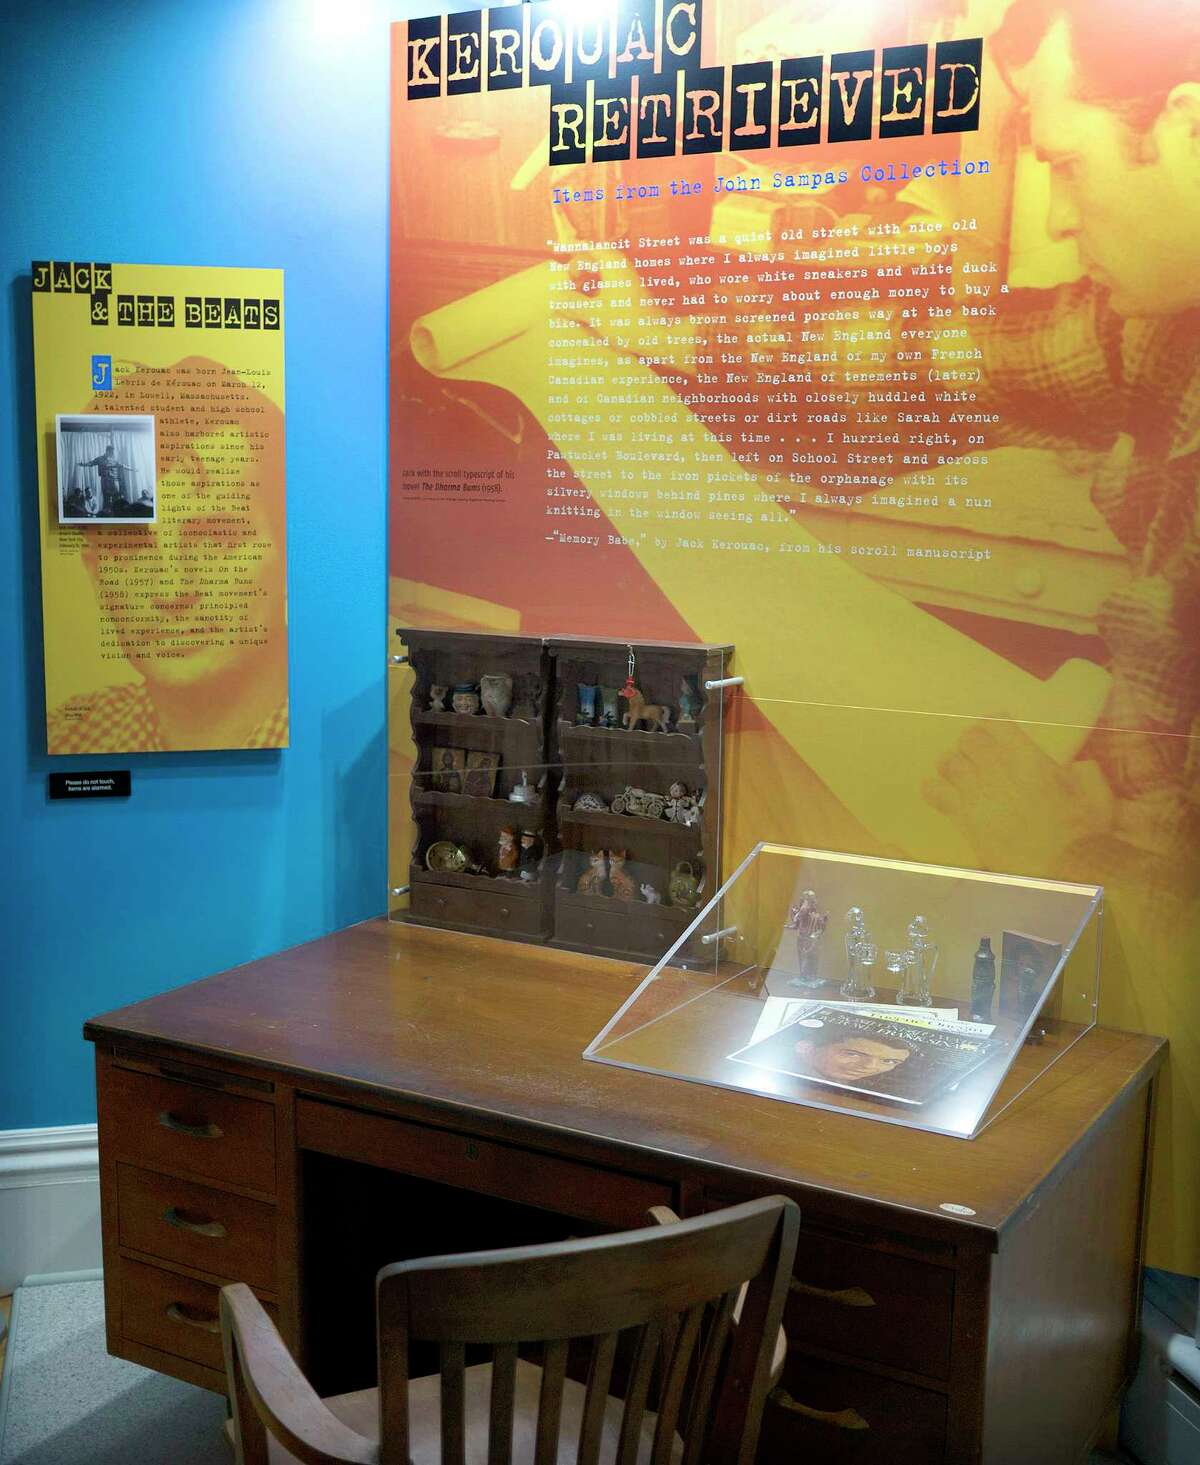 In this Sept. 18, 2015, photo provided by the University of Massachusetts, Lowell, some of author Jack Kerouac’s belongings, including a Frank Sinatra album and collection of figurines, are displayed on the desk where he once wrote, in the exhibit “Kerouac Retrieved: Items from the John Sampas Collection,” at the university in Lowell, Mass. The exhibit opens in Kerouac’s hometown on Oct. 8.